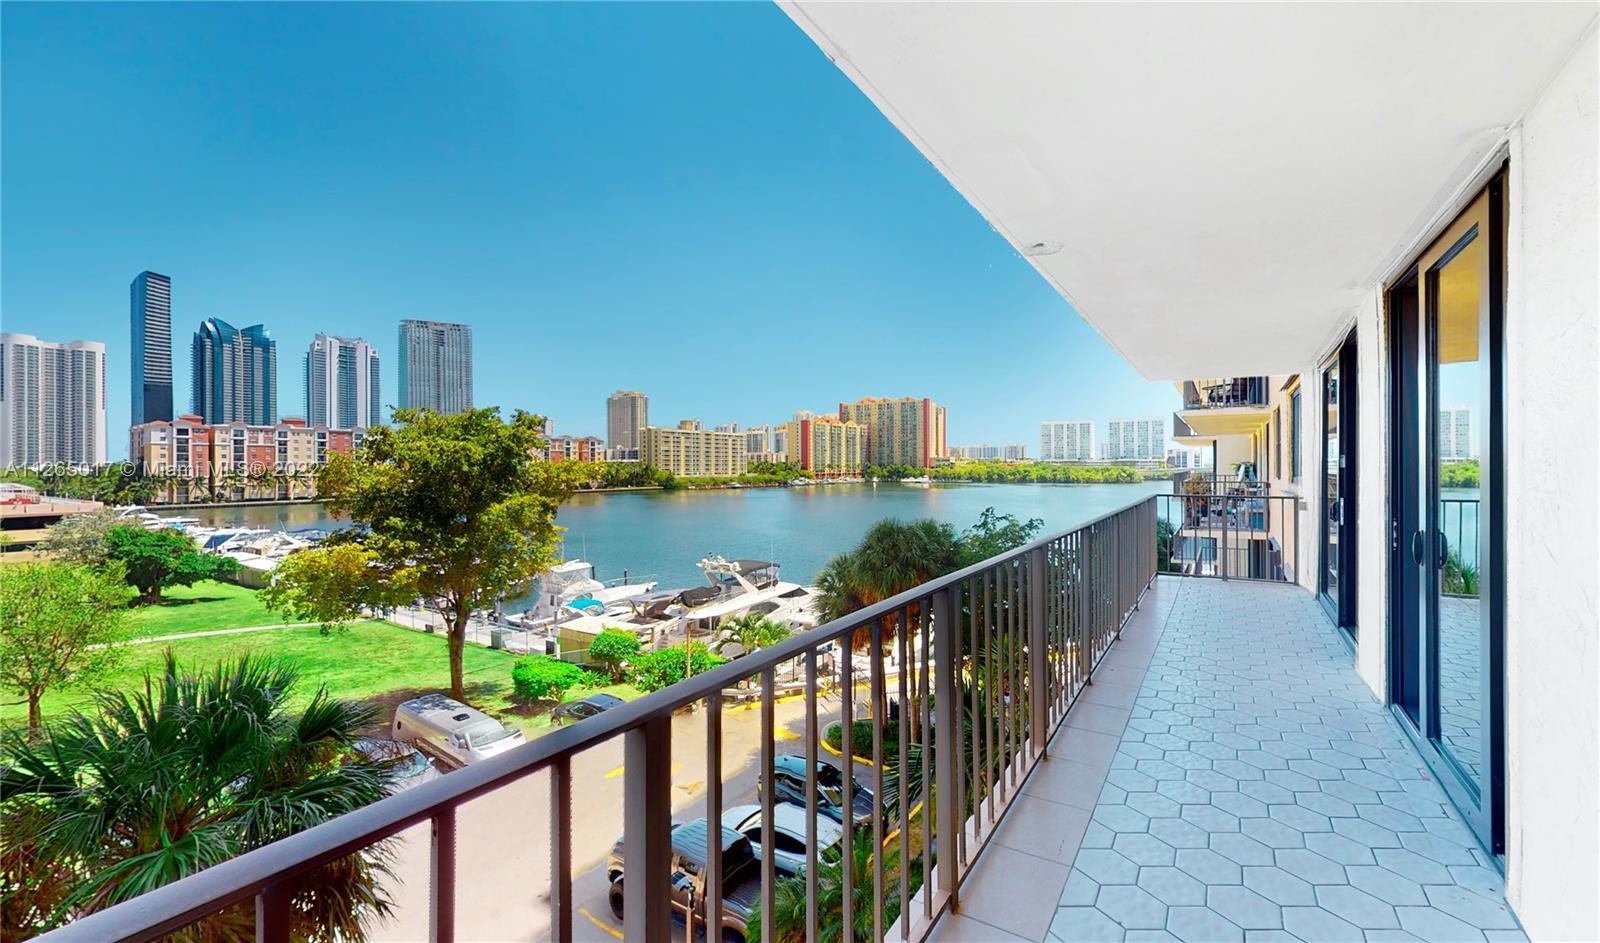 Bright & spacious 2 bedroom unit drenched in sunlight just 3 Blocks to ocean. Breathtaking views of 